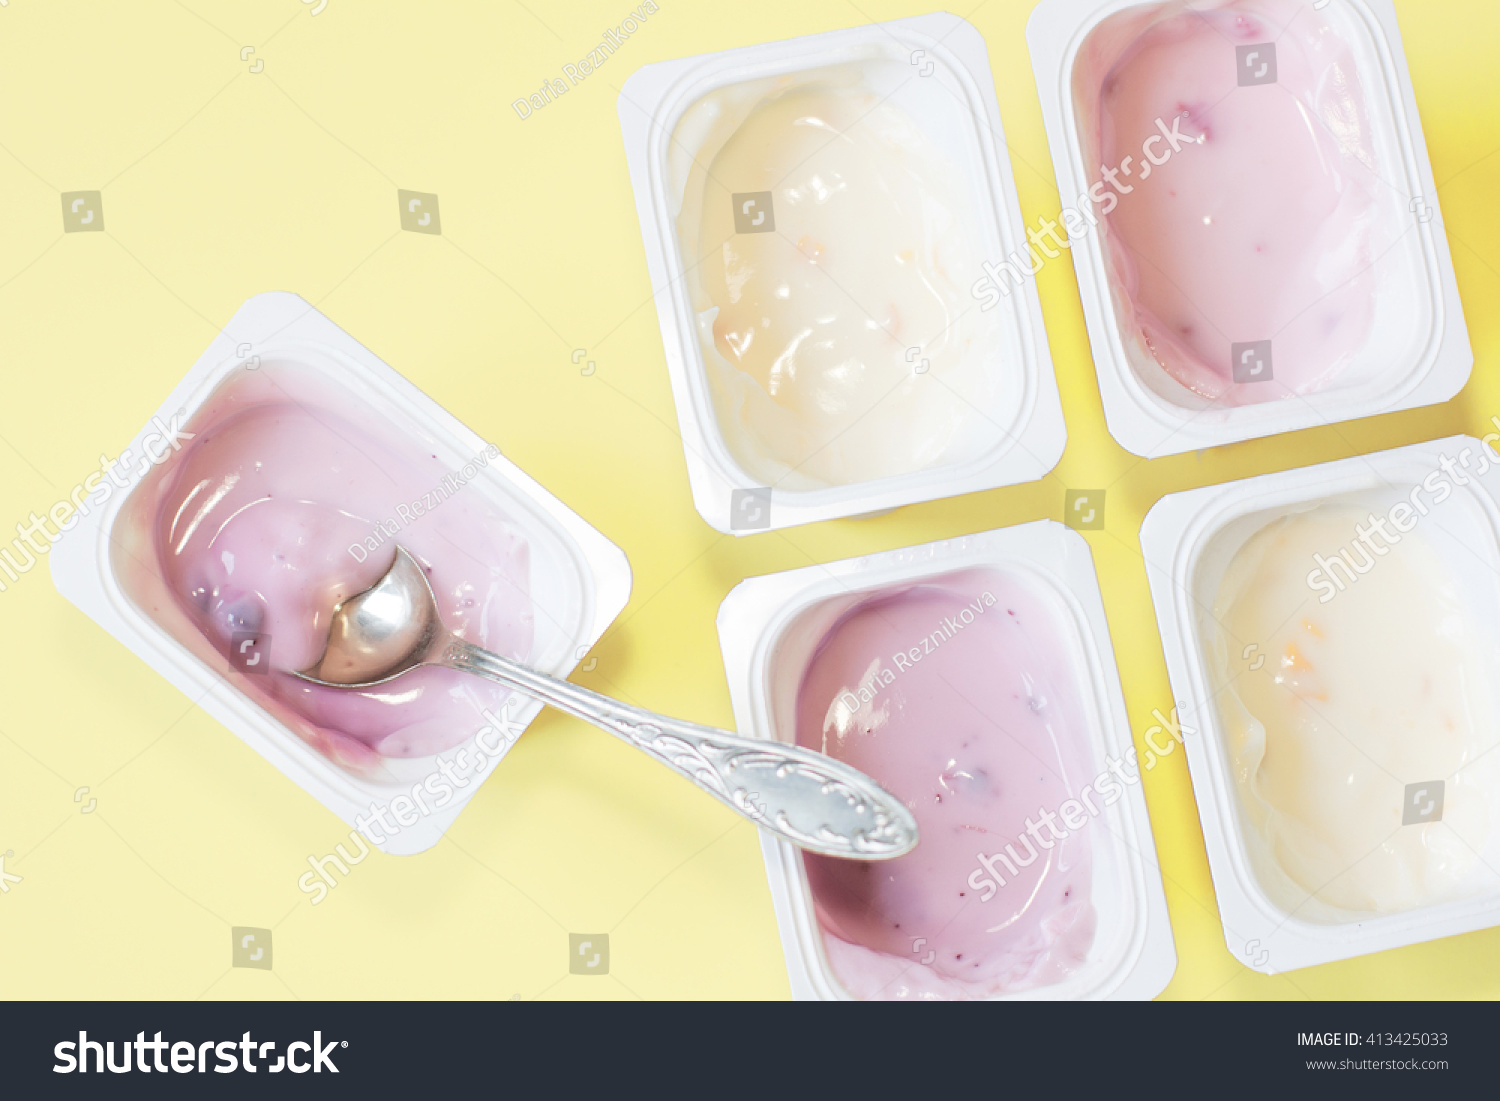 Download Yogurt Plastic Cups On Yellow Background Food And Drink Stock Image 413425033 Yellowimages Mockups